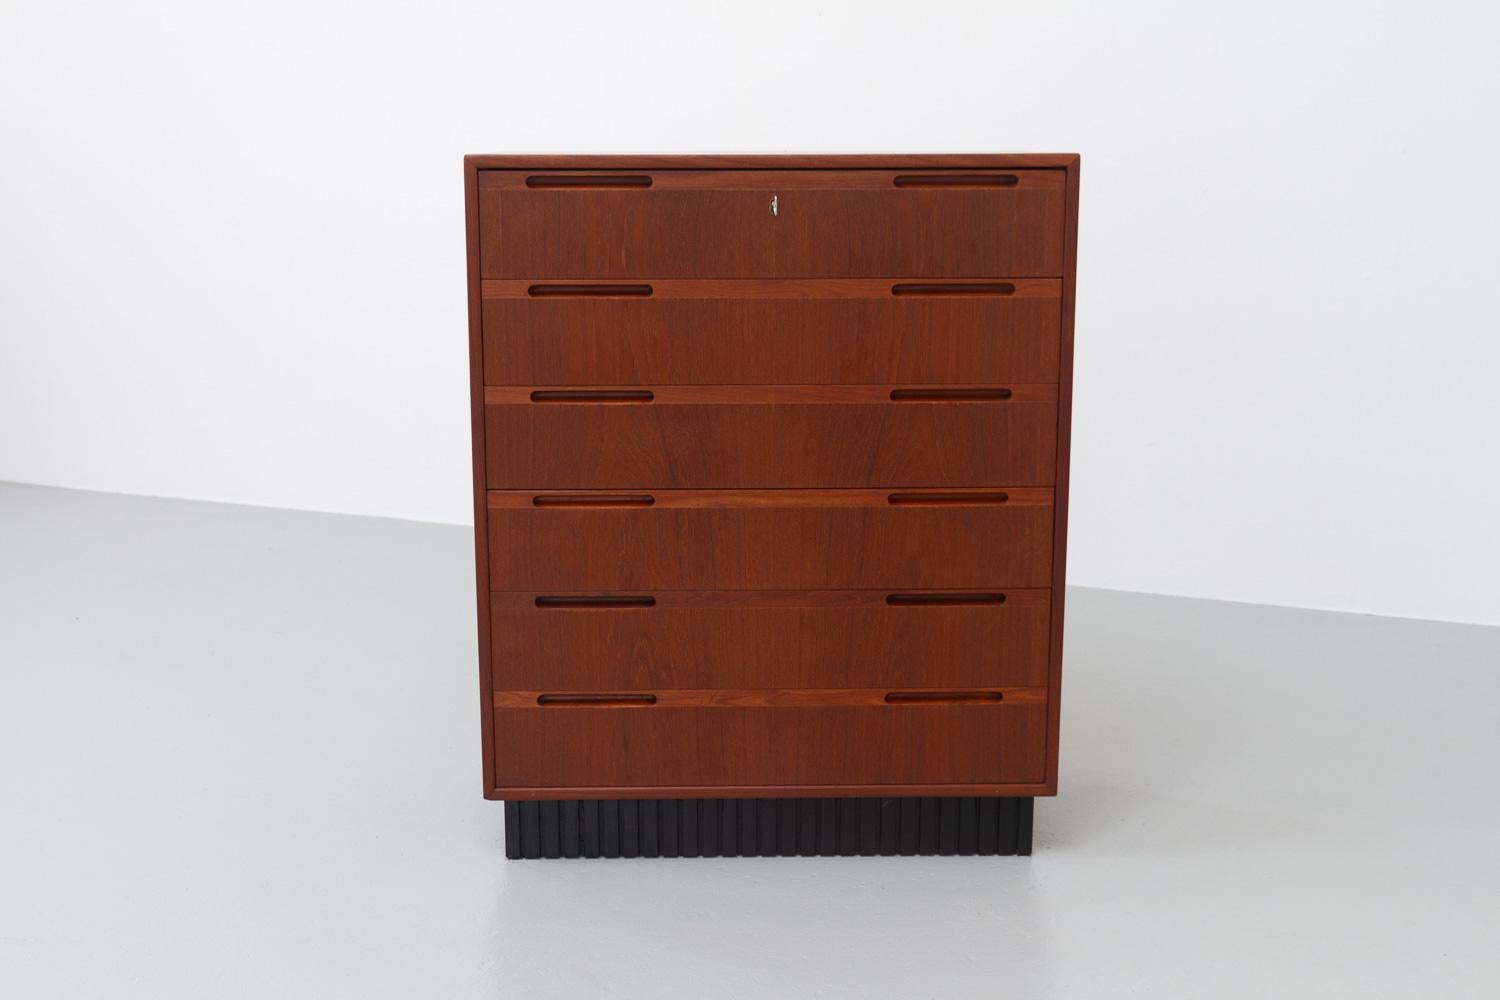 Vintage Danish Modern Teak Dresser, 1960s.
Very expressive Mid-Century Modern chest of drawers with six drawers. Pulls are integrated in the drawer front for a more cubic and minimalistic appearance. 
Top drawer has a lock with key. Standing on a